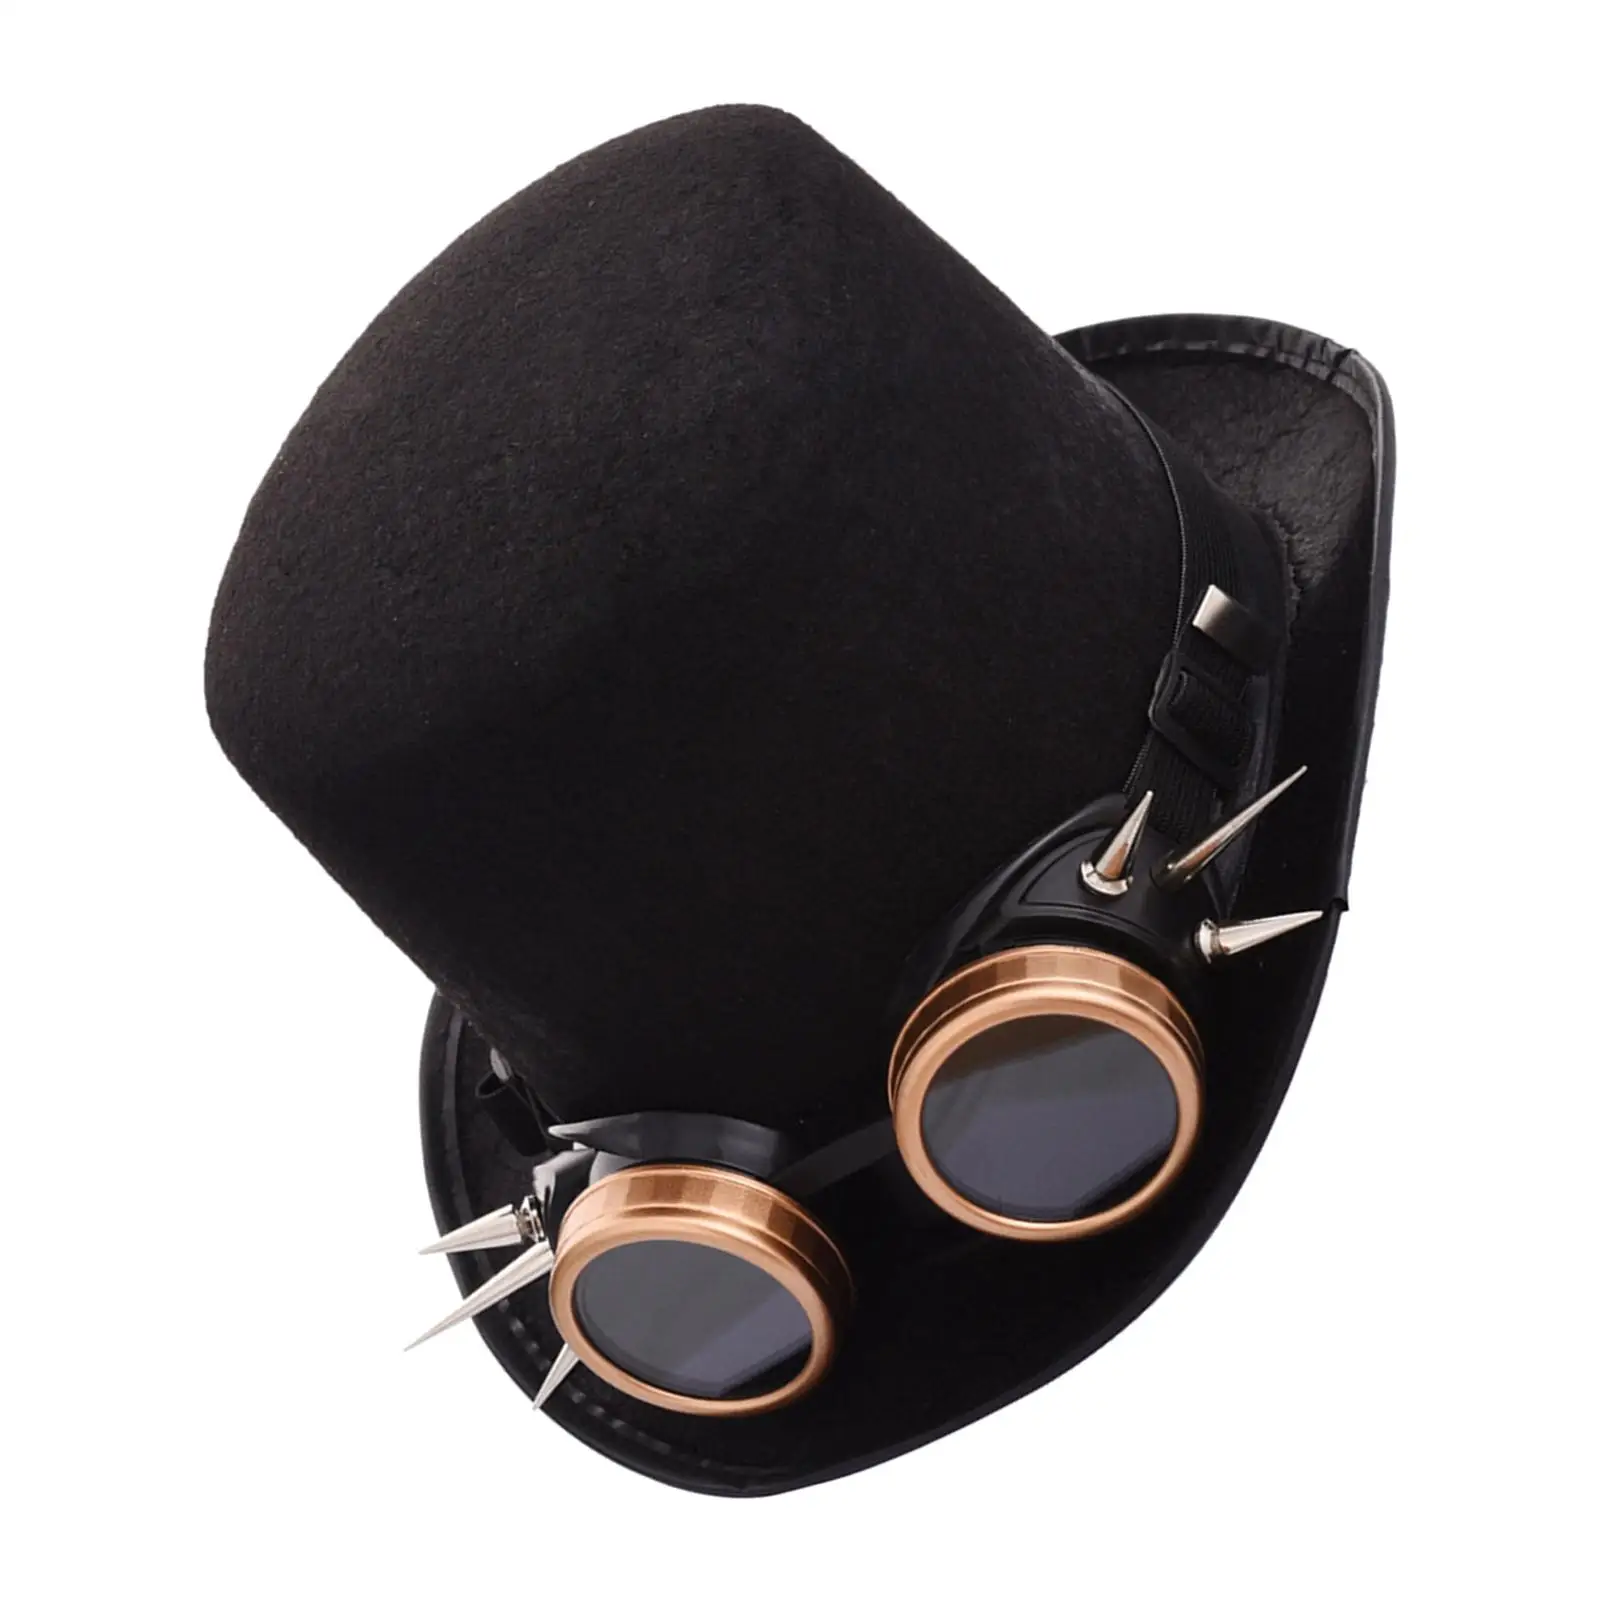 Vintage Style Steampunk Top Hat with Goggles Party Cosplay Accessory Halloween Party Hat Head Gear Punk Top Hats for Women Men